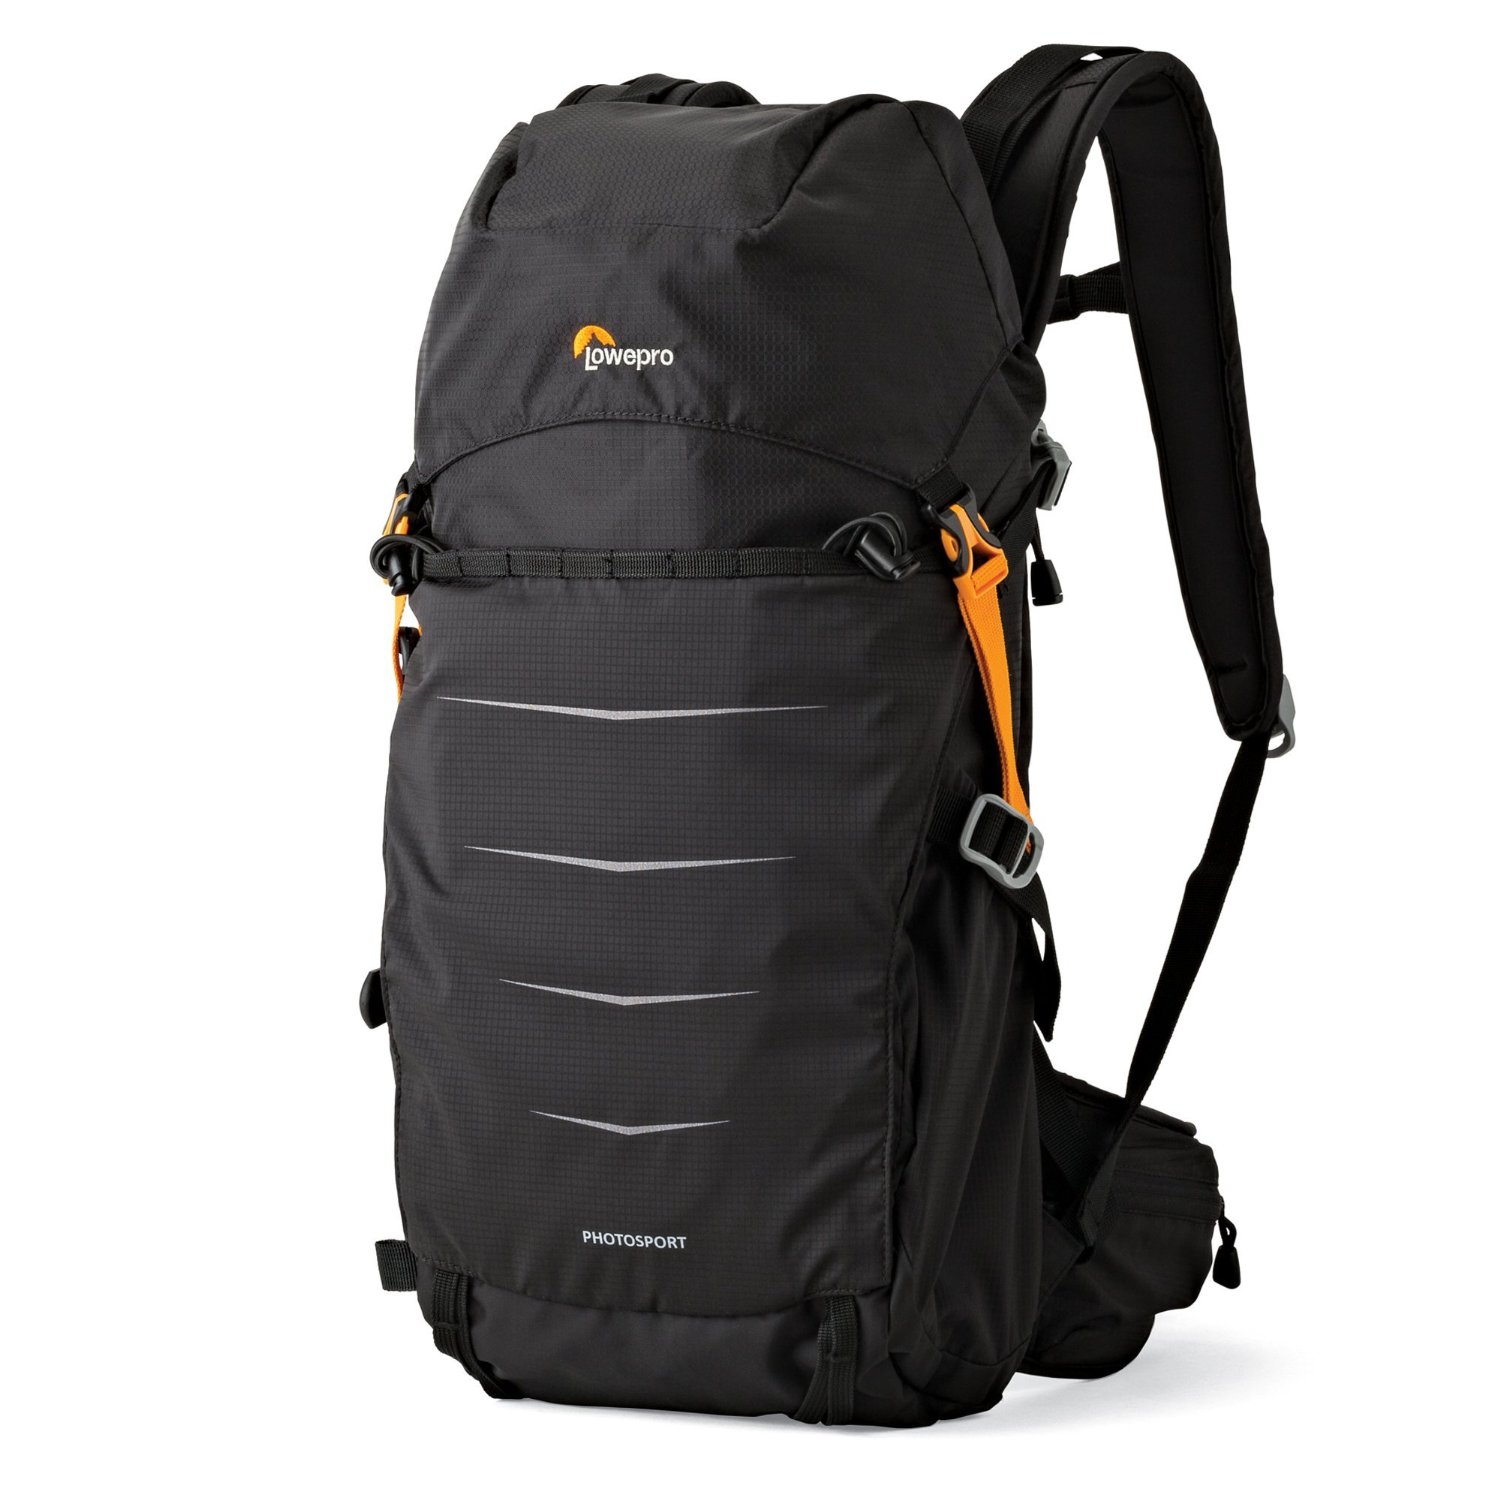 small camera backpack for hiking